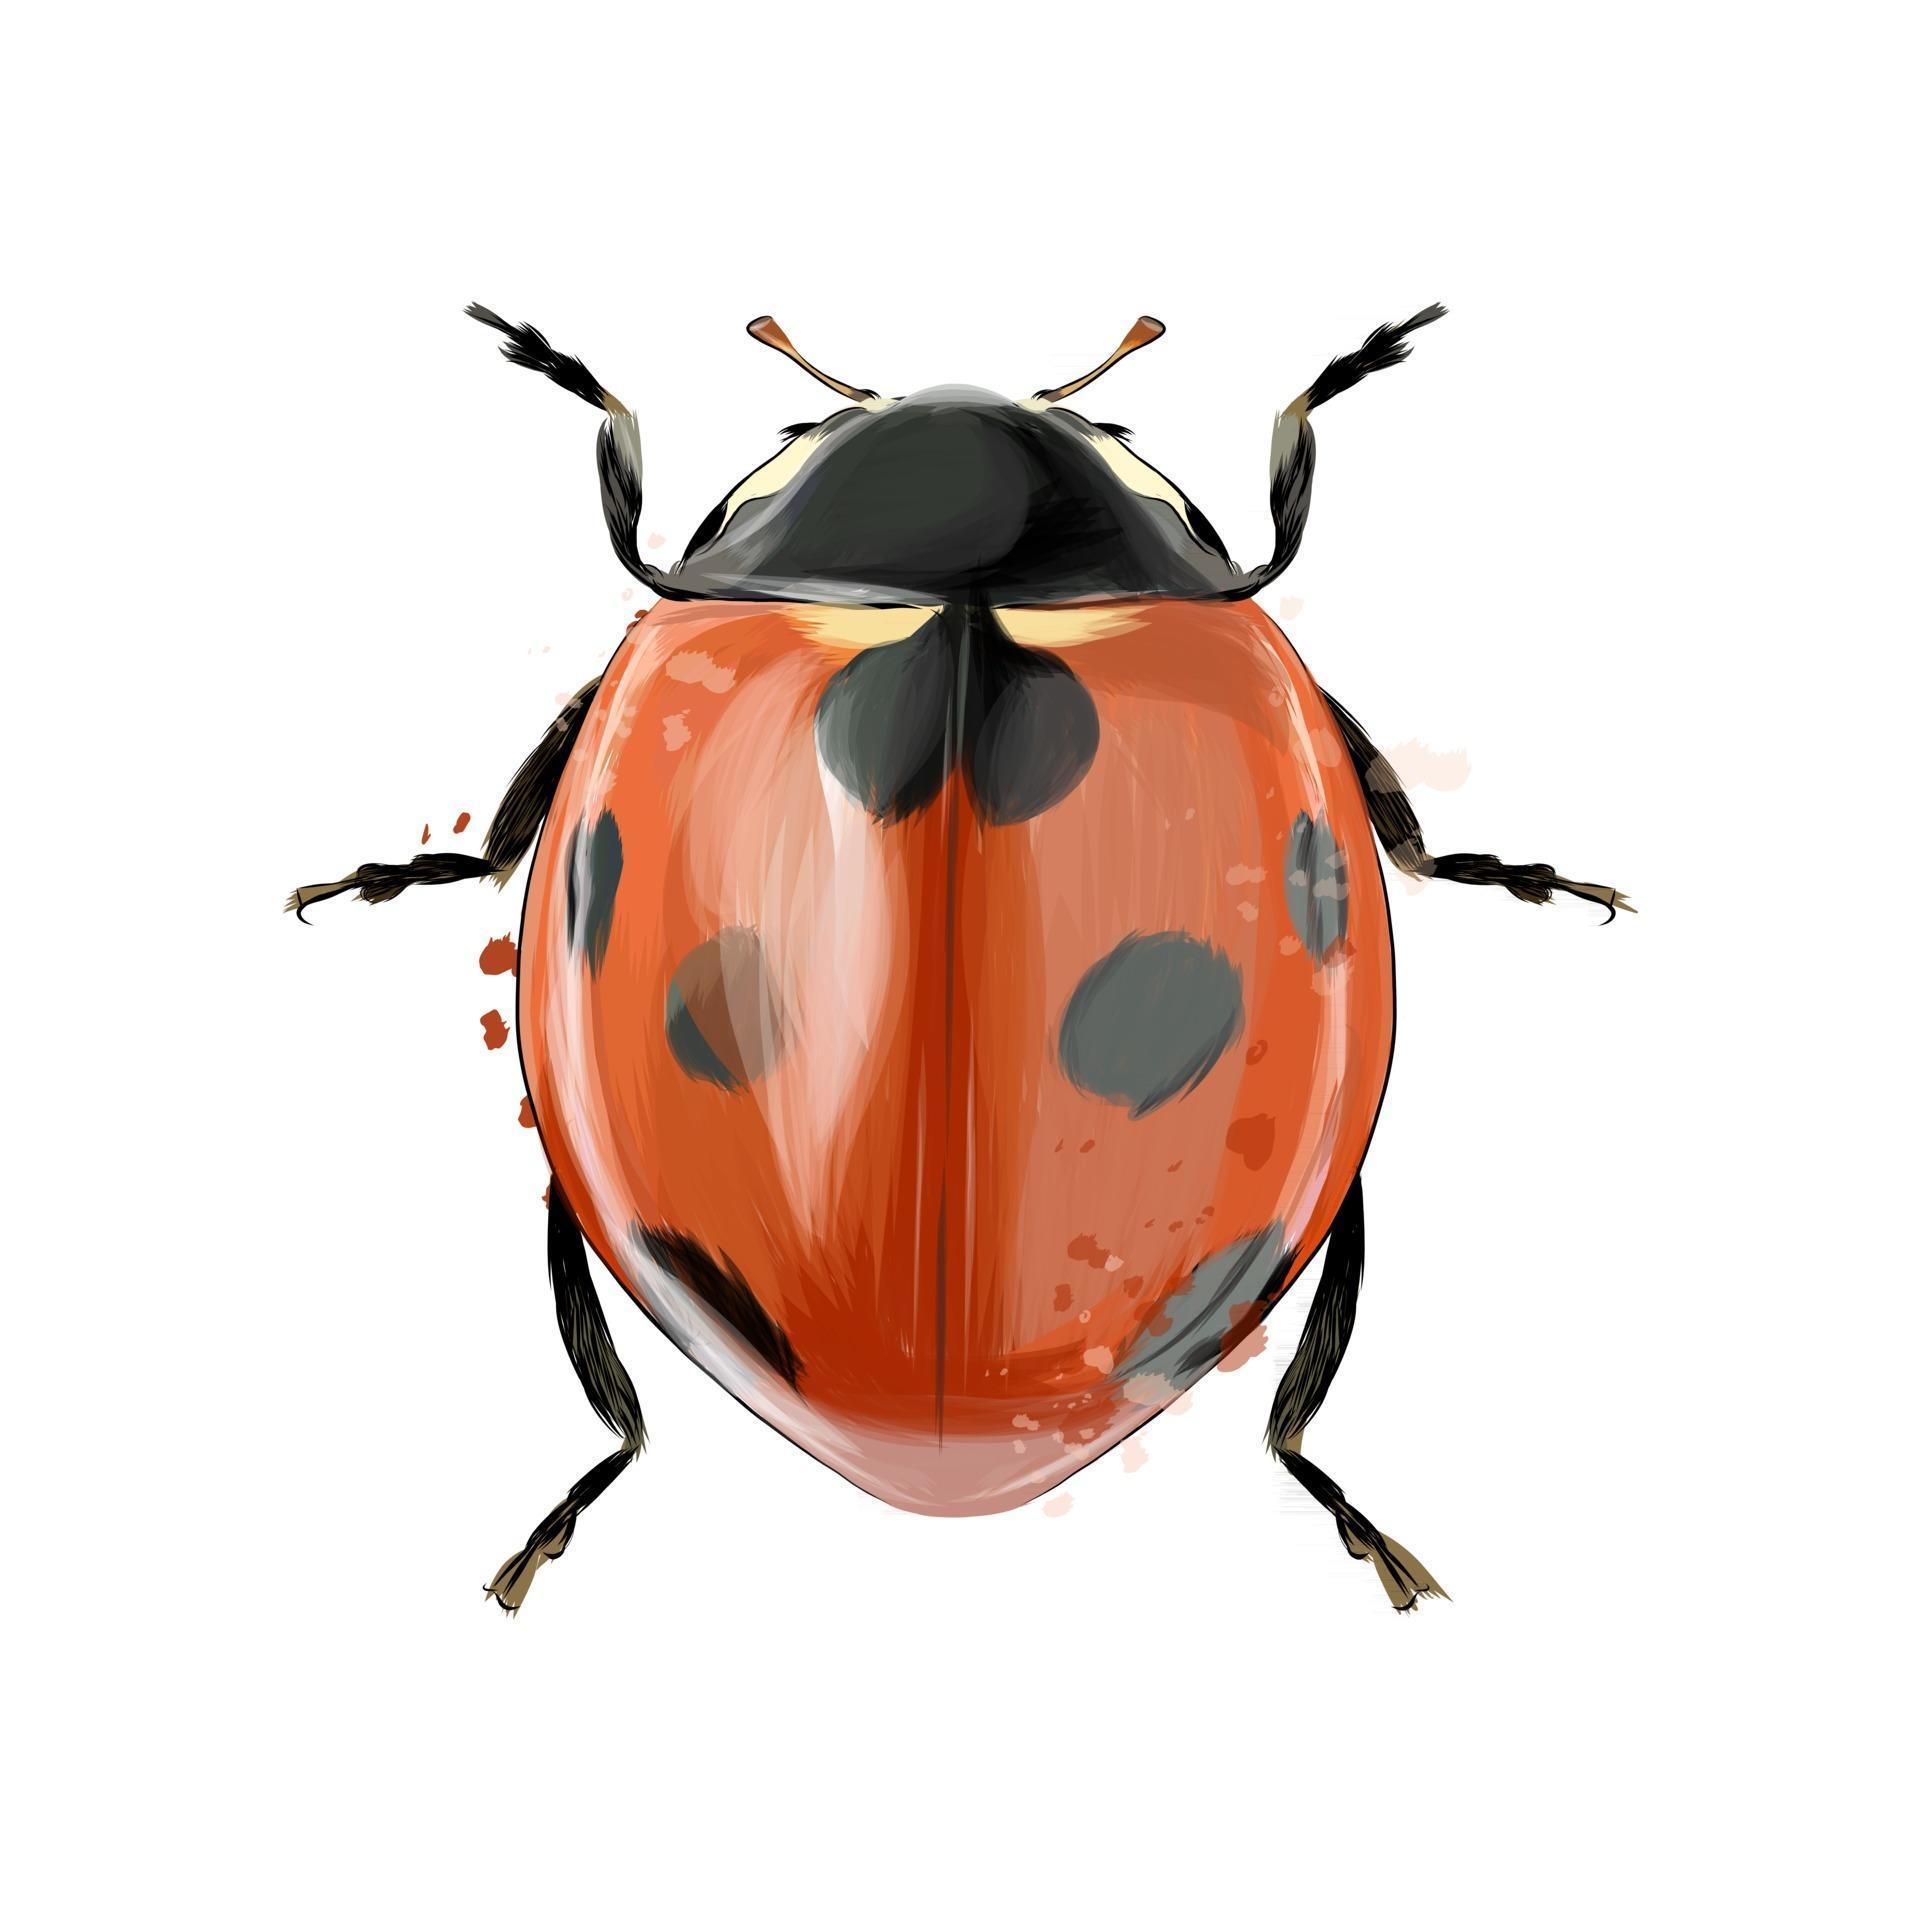  ladybug from splash of watercolors colored drawing realistic. Vector 